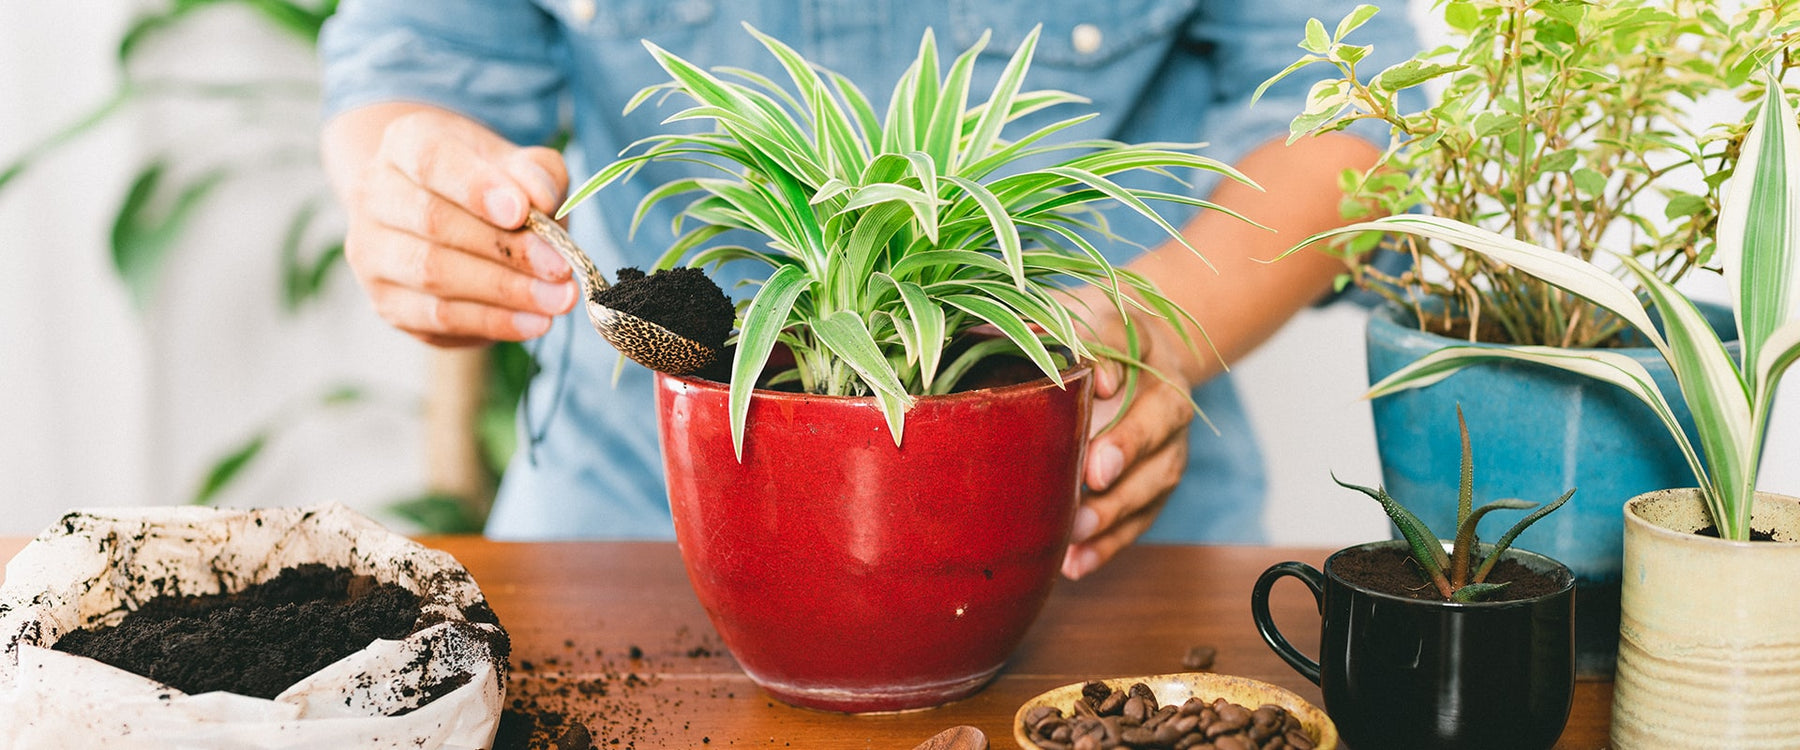 10 Creative and eco-friendly ways to reuse coffee grounds at home